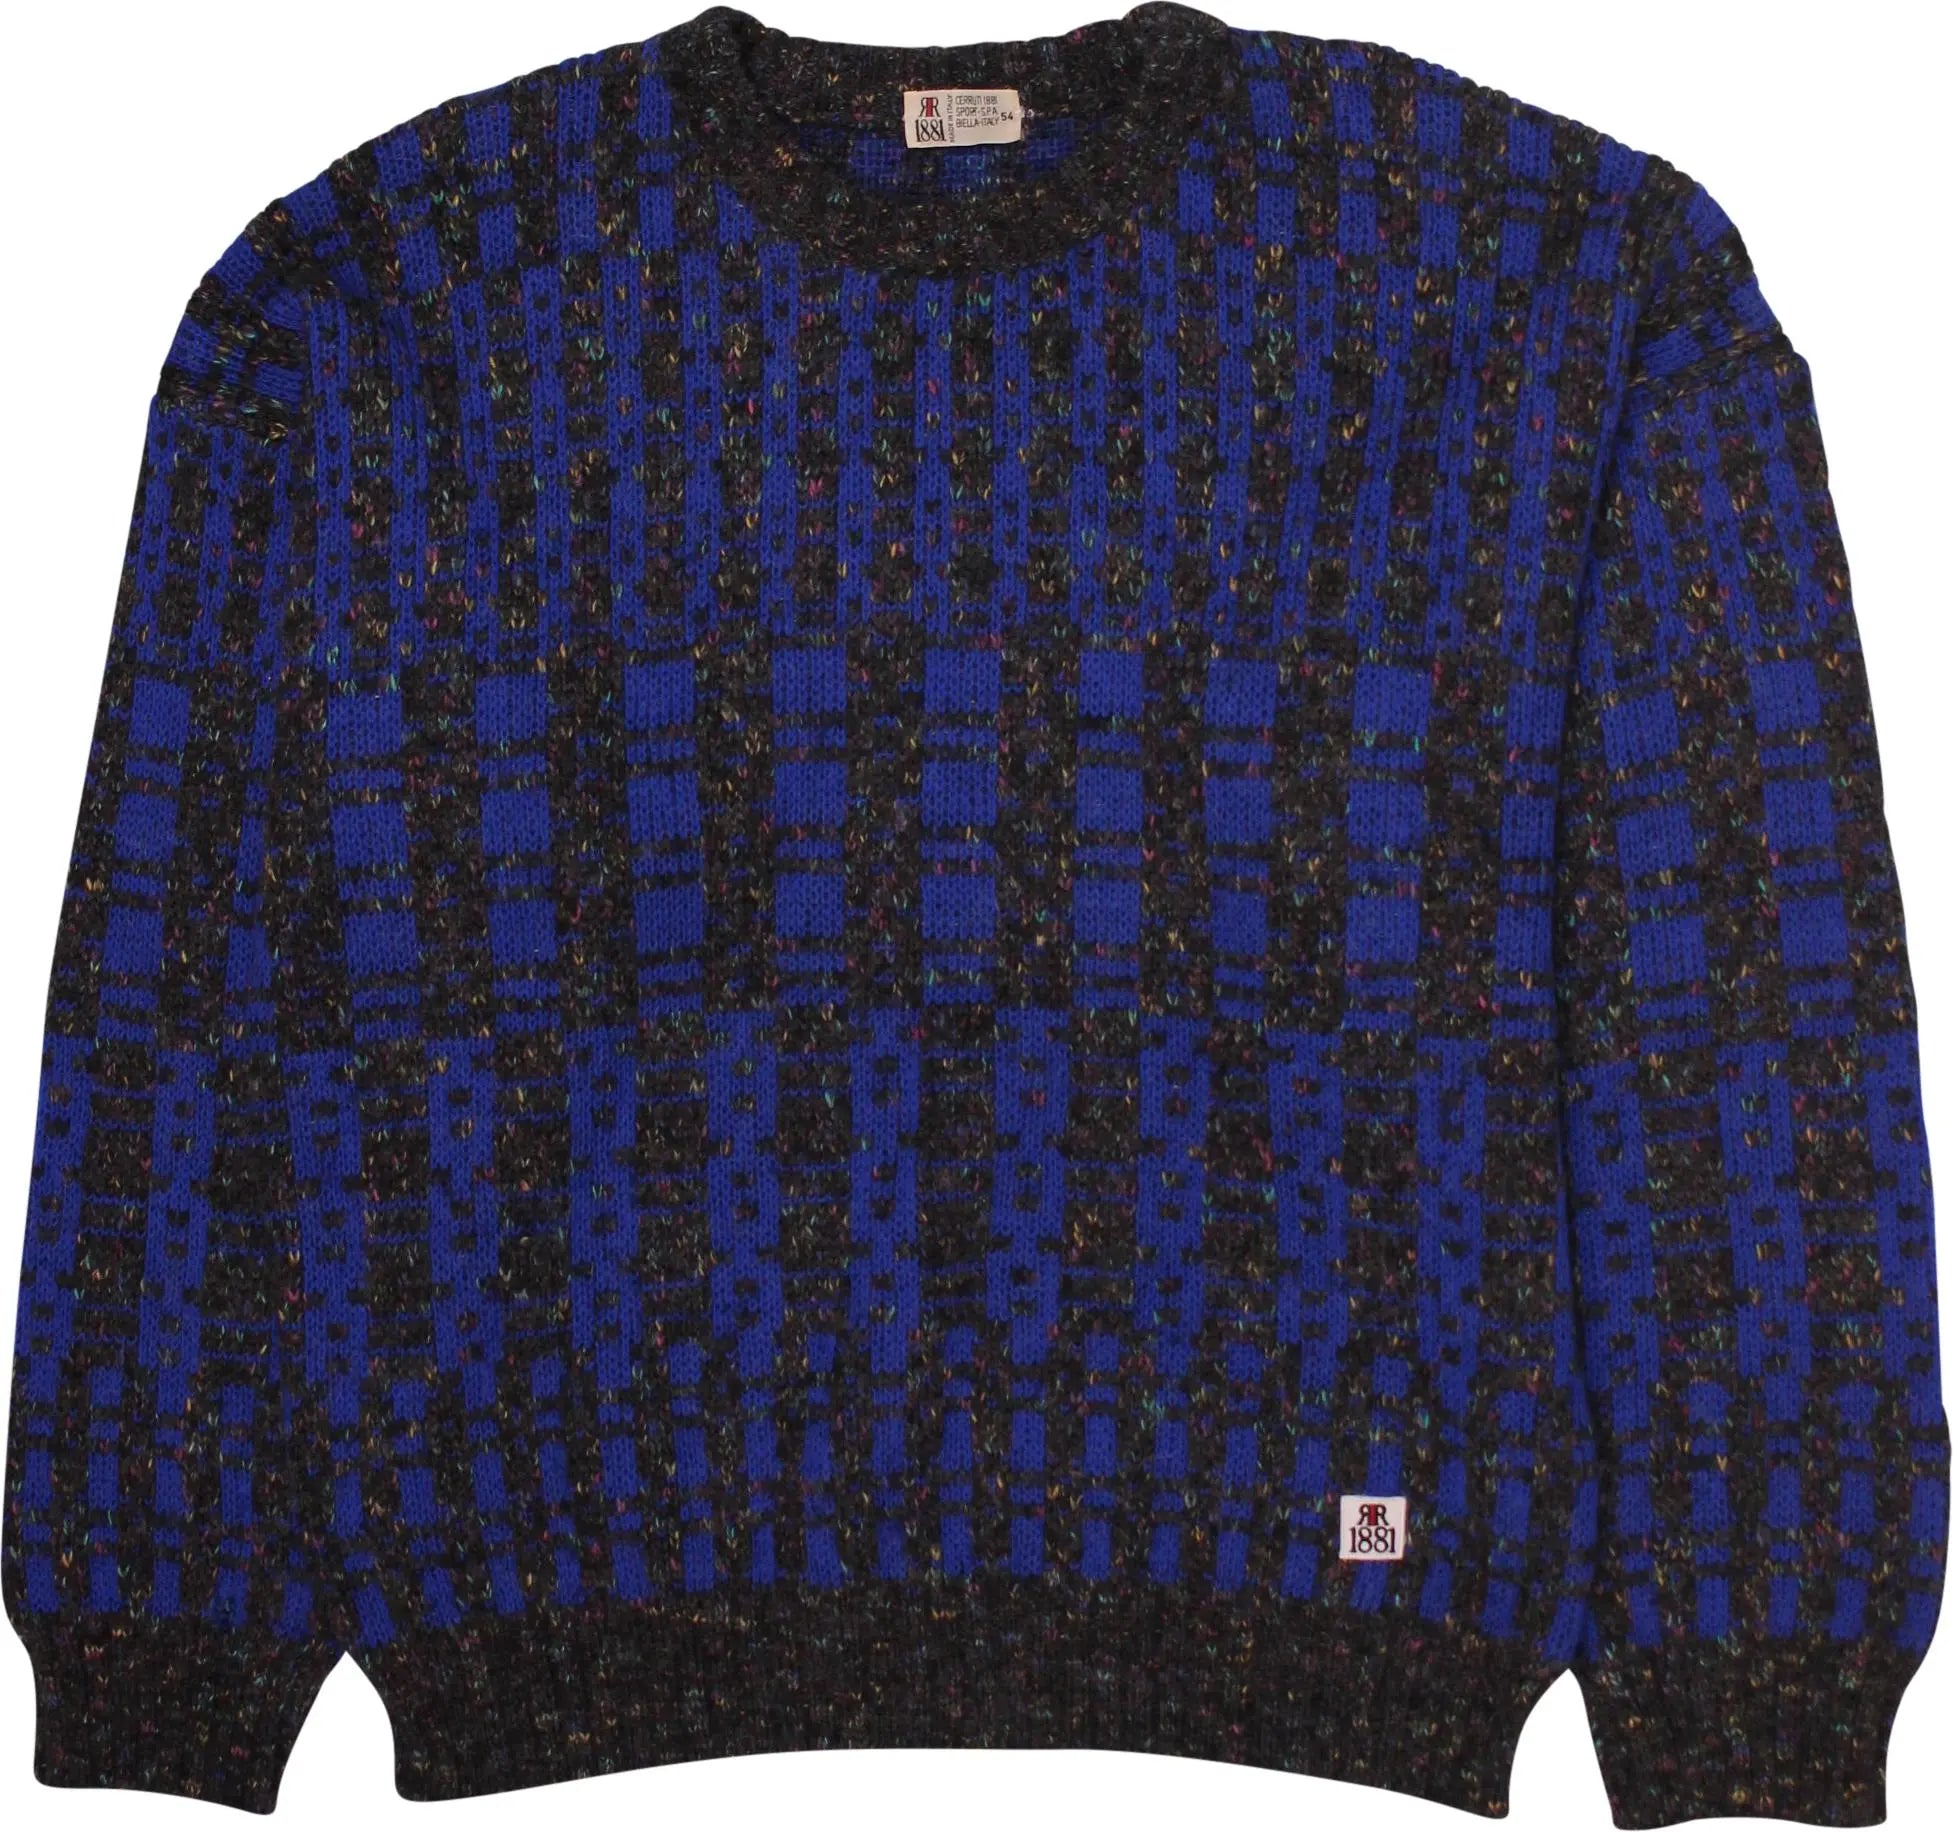 Cerruti 1881 - Knitted Sweater by Cerruti 1881- ThriftTale.com - Vintage and second handclothing